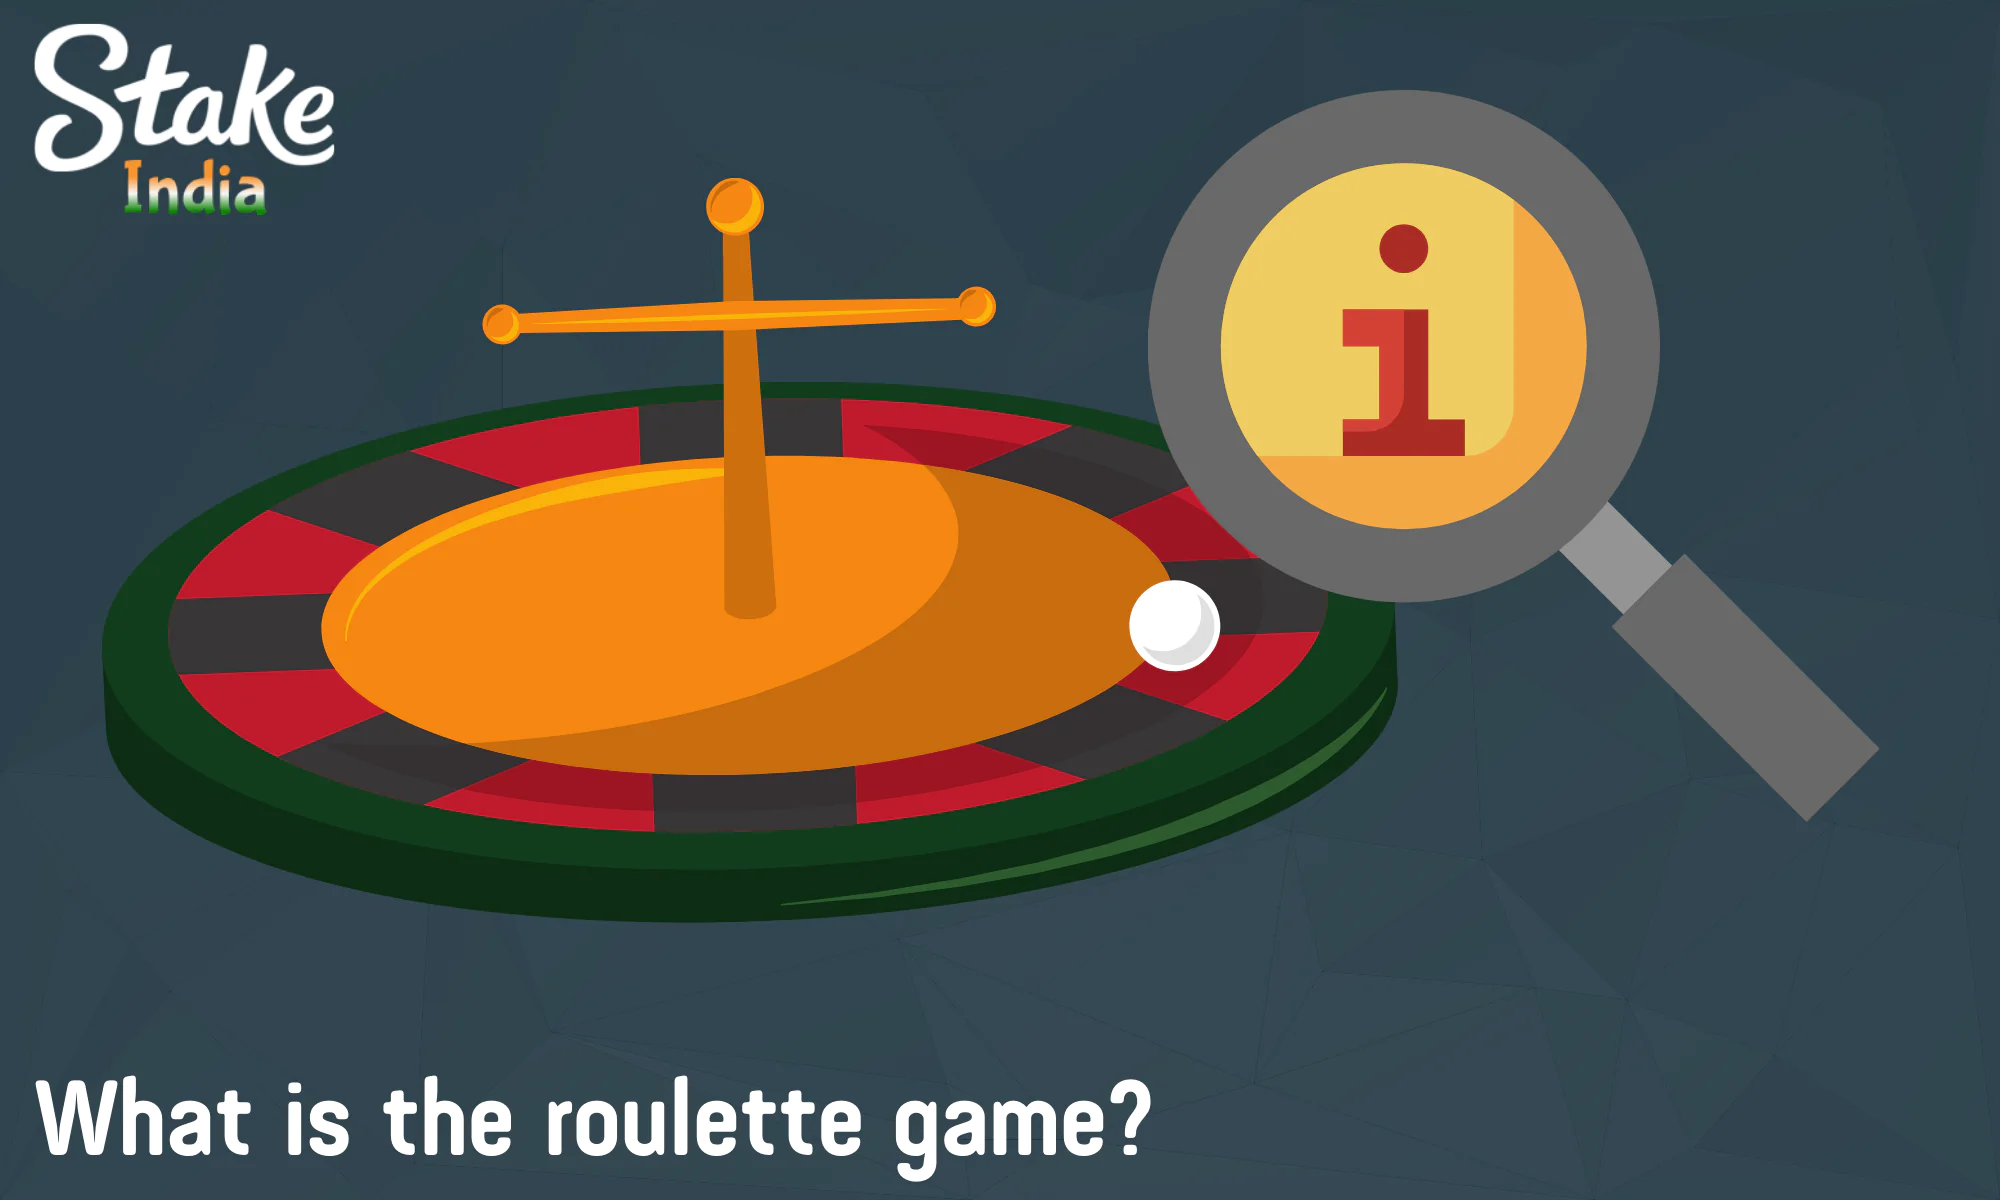 Roulette in Stake works with a mechanism that spins the wheel over and over again